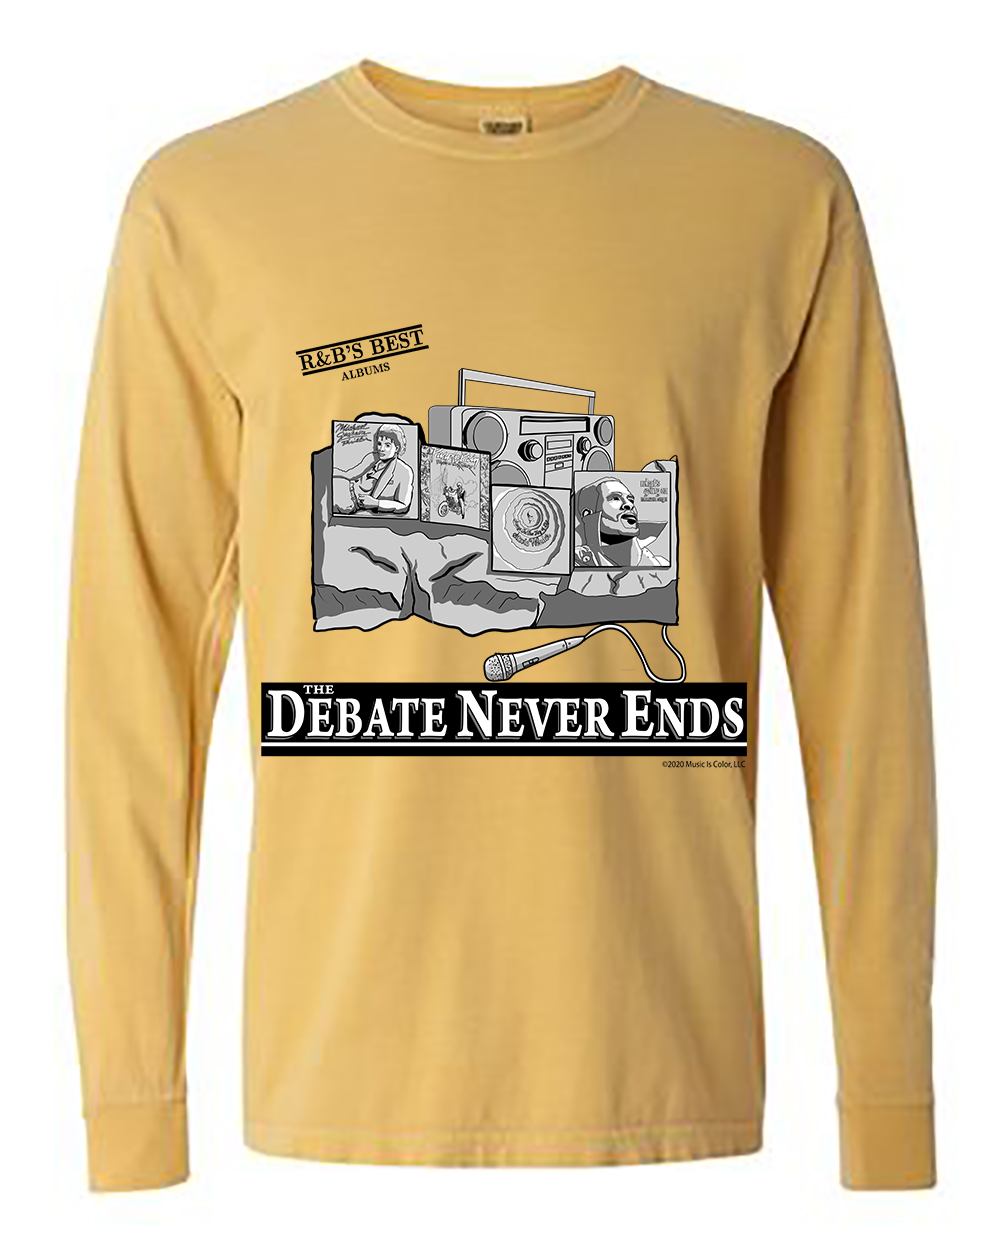 Mount Rushmore - R&B’s Best Albums (Gold Long Sleeve Shirt)